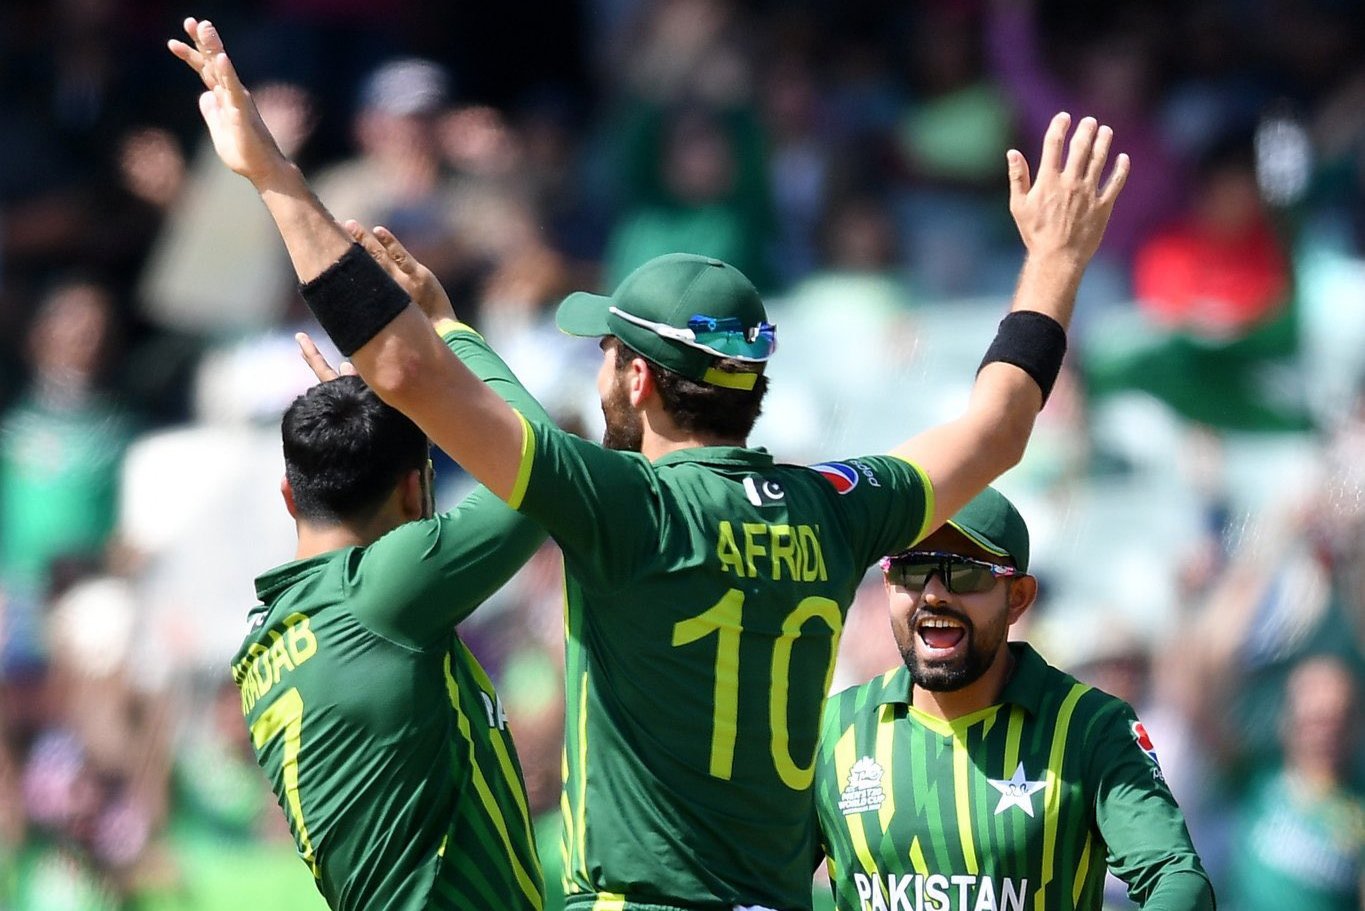 T20 World Cup: Pakistan defy all odds, storm into semifinal